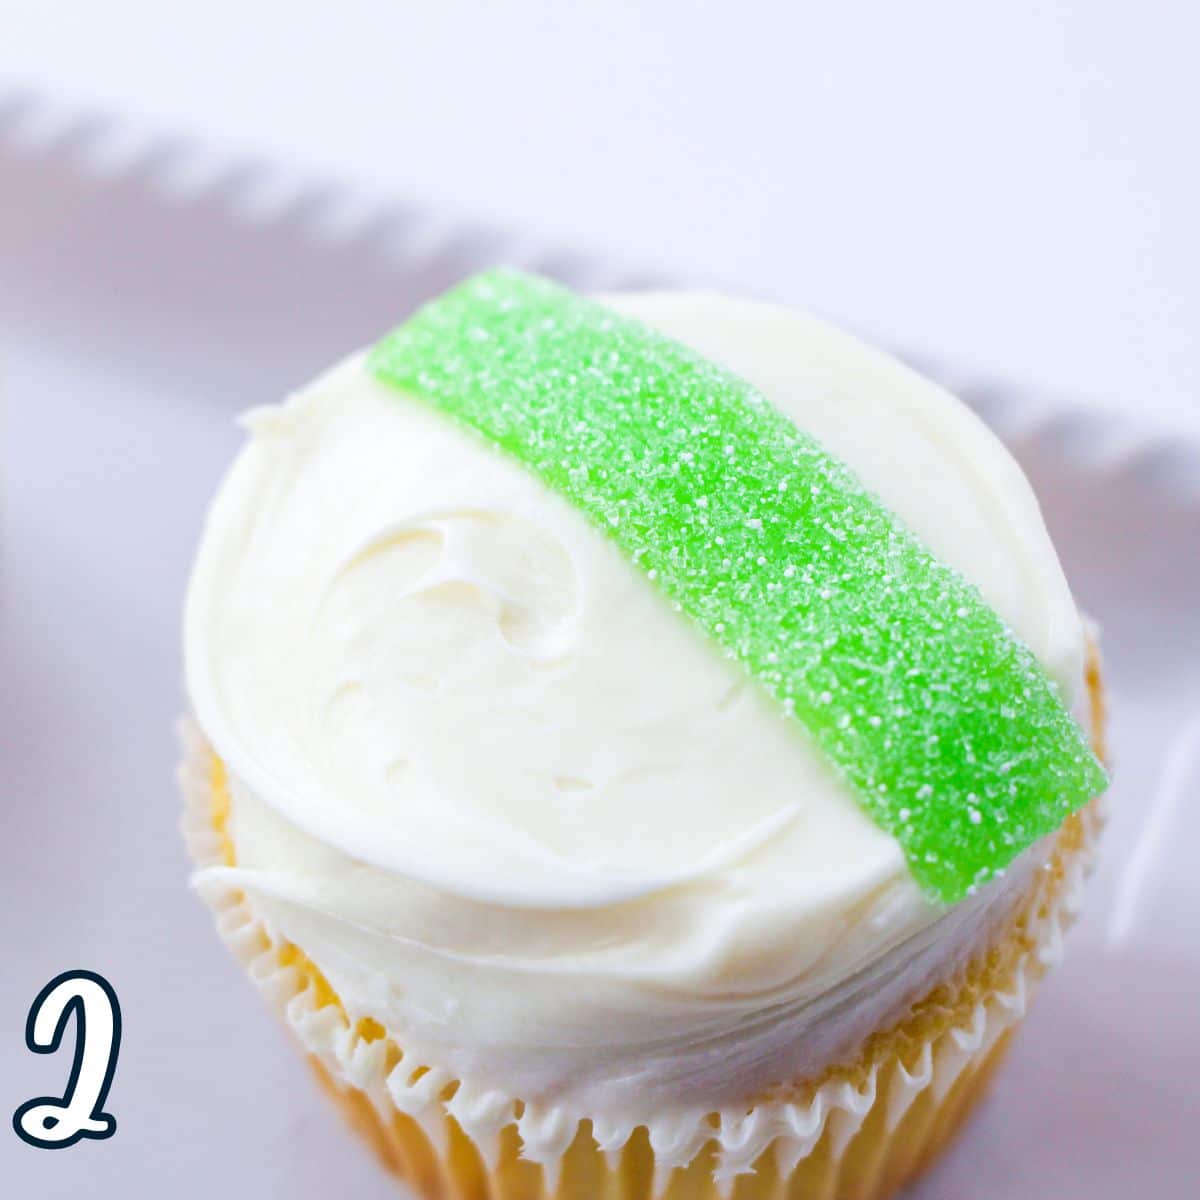 A cupcake with white frosting and a green gummy streamer on a plate.